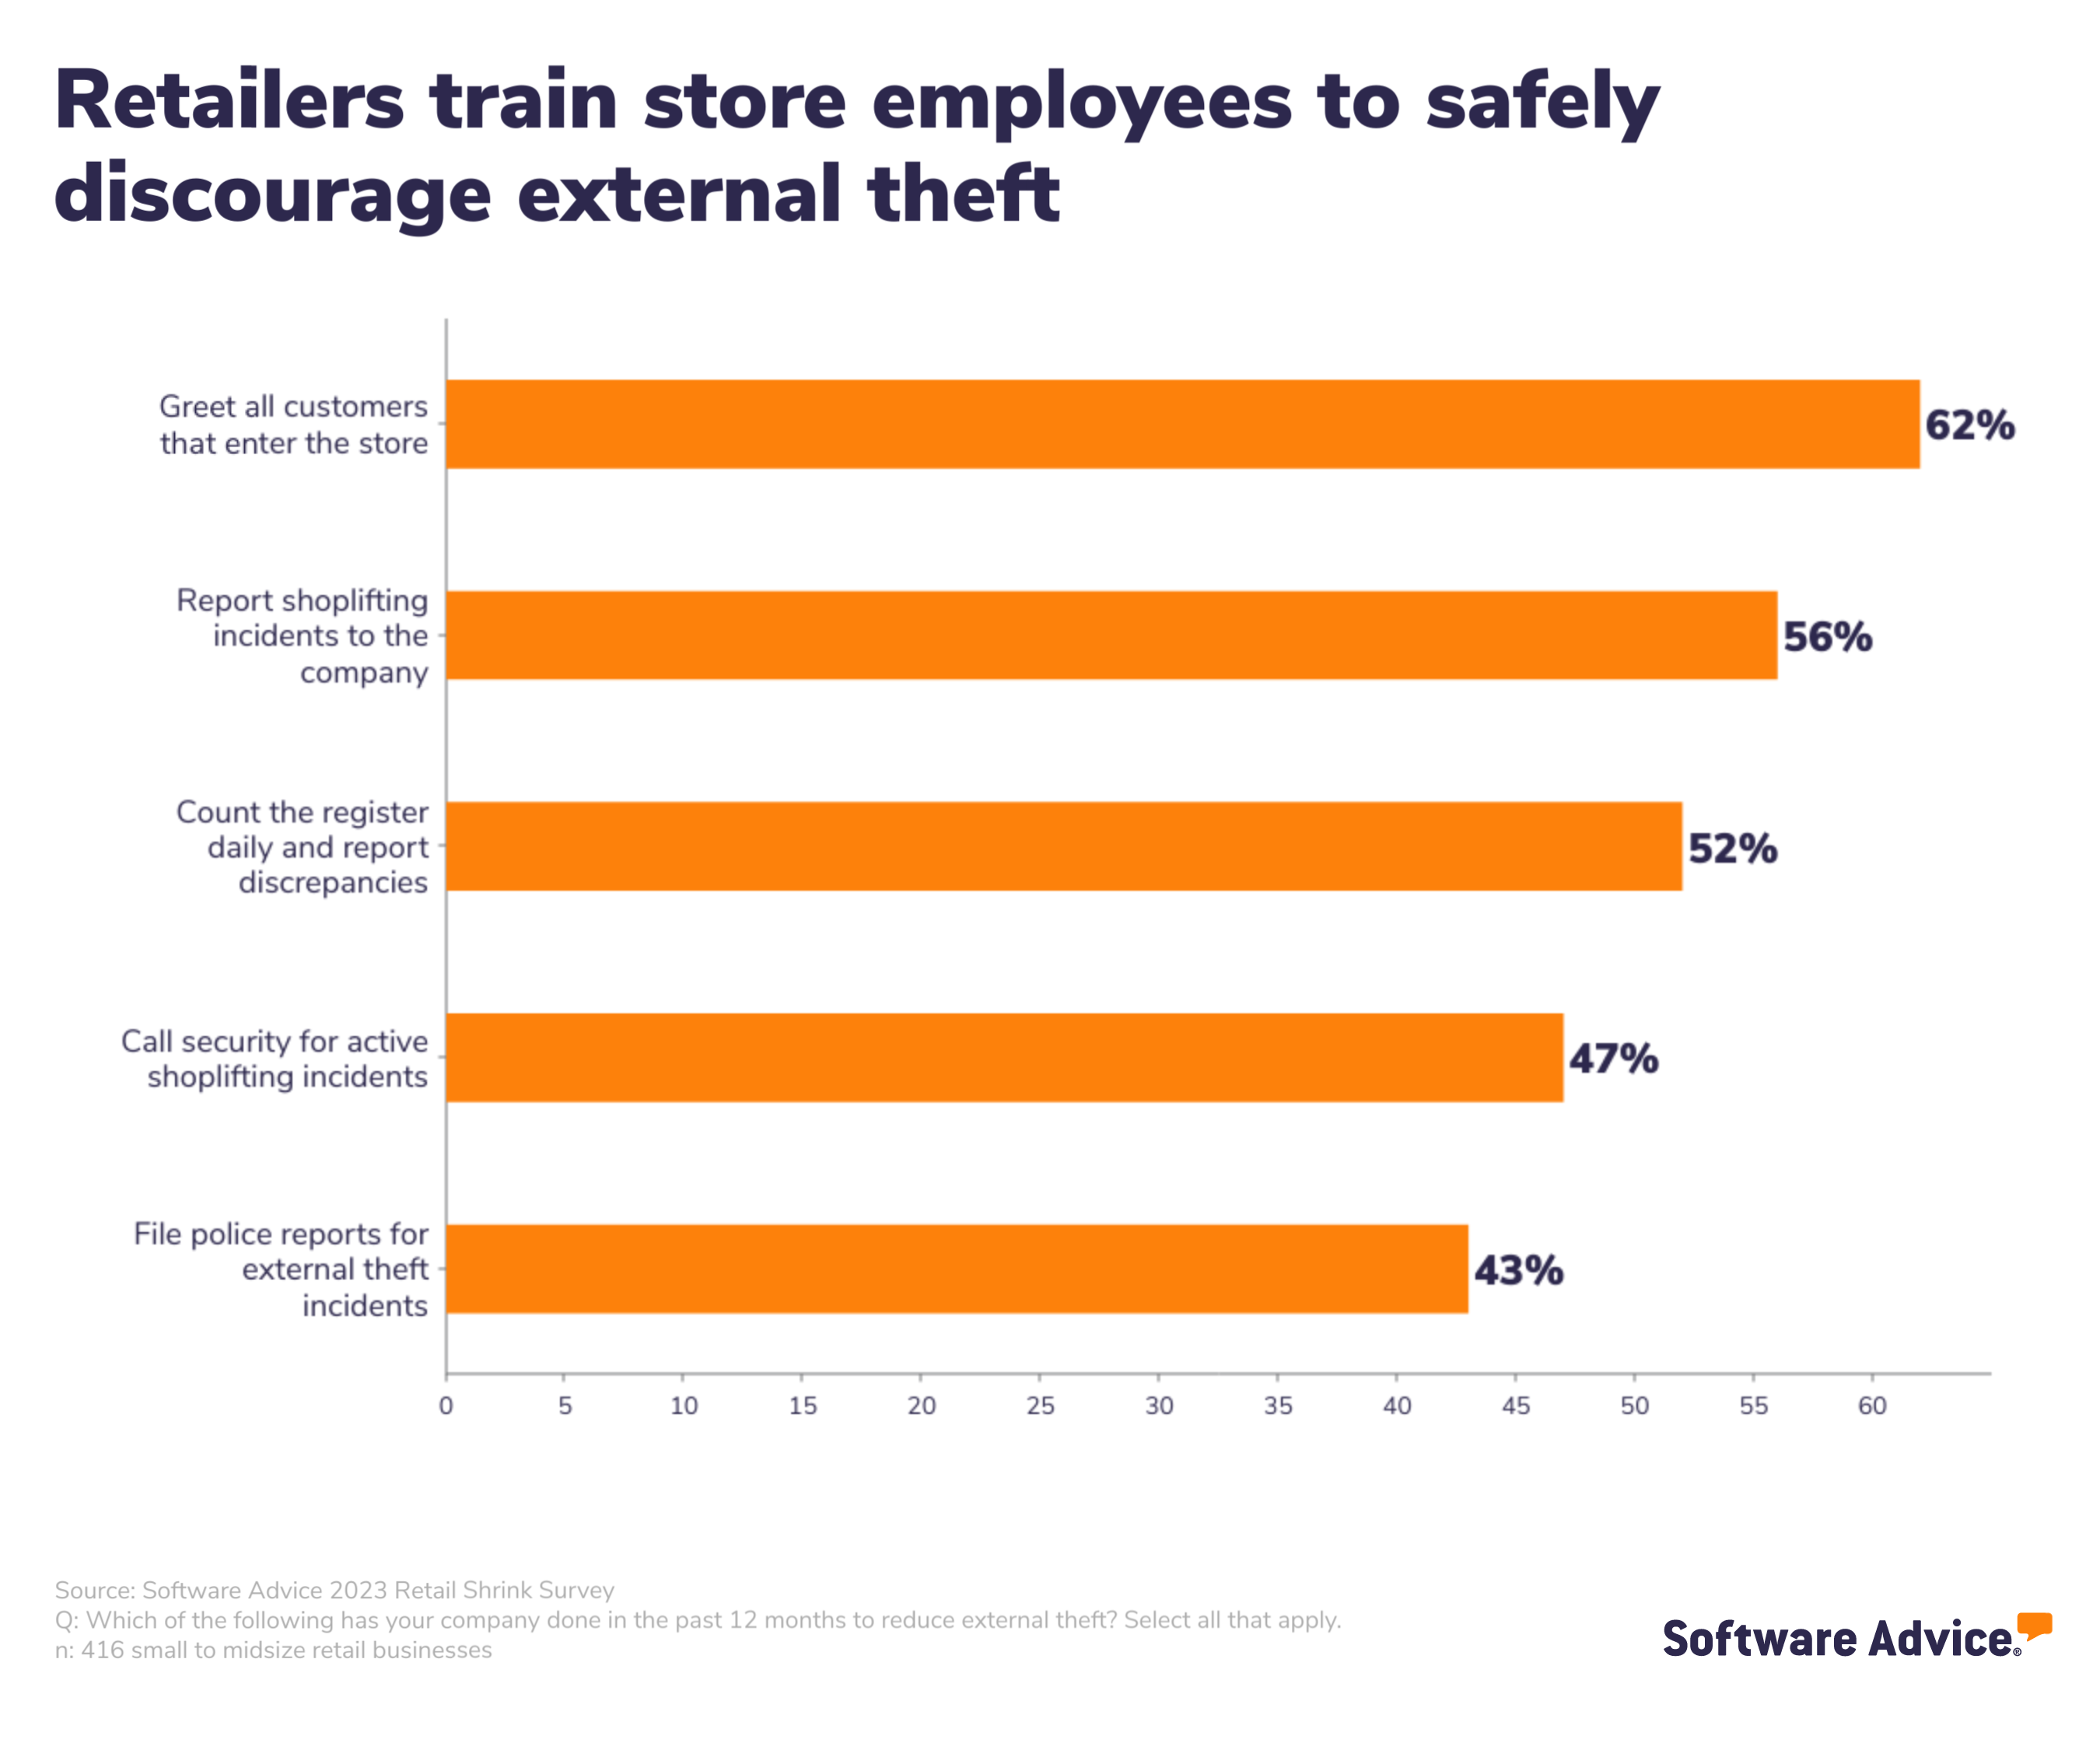 Bar chart showing how retailers expect their employees to deter shrink in stores. 